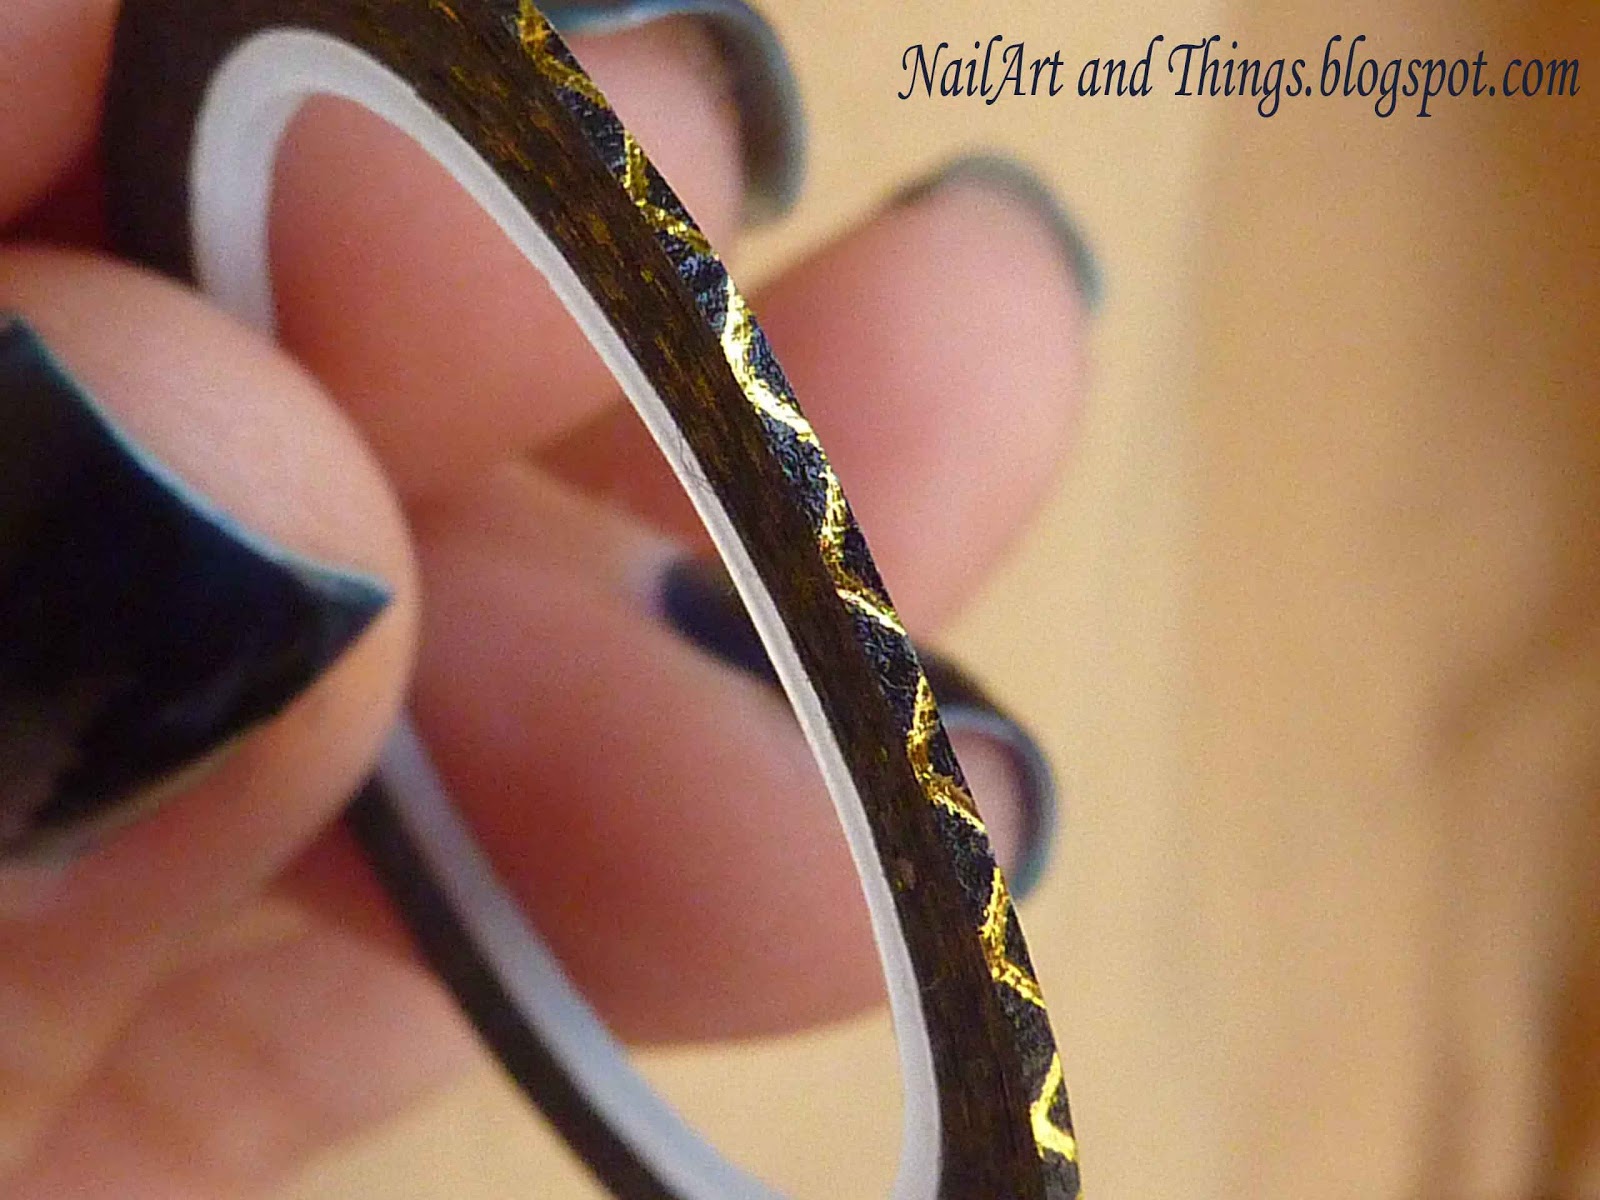 2. 10 Tips for Using Nail Art Striping Tape Like a Pro - wide 7